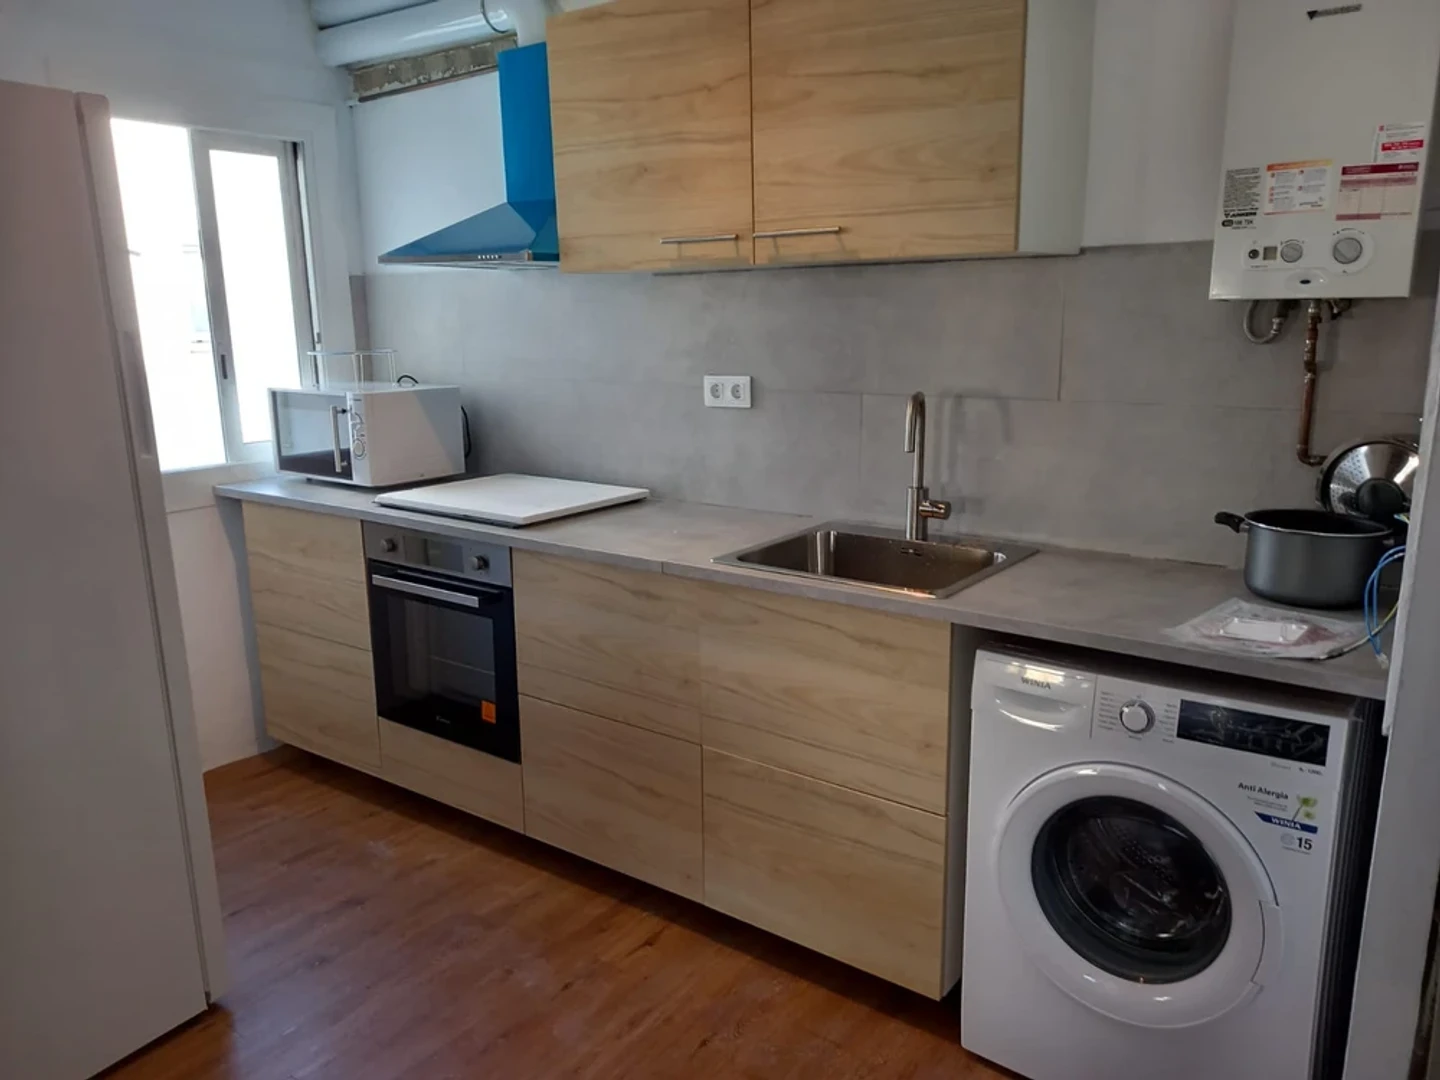 Renting rooms by the month in Lleida